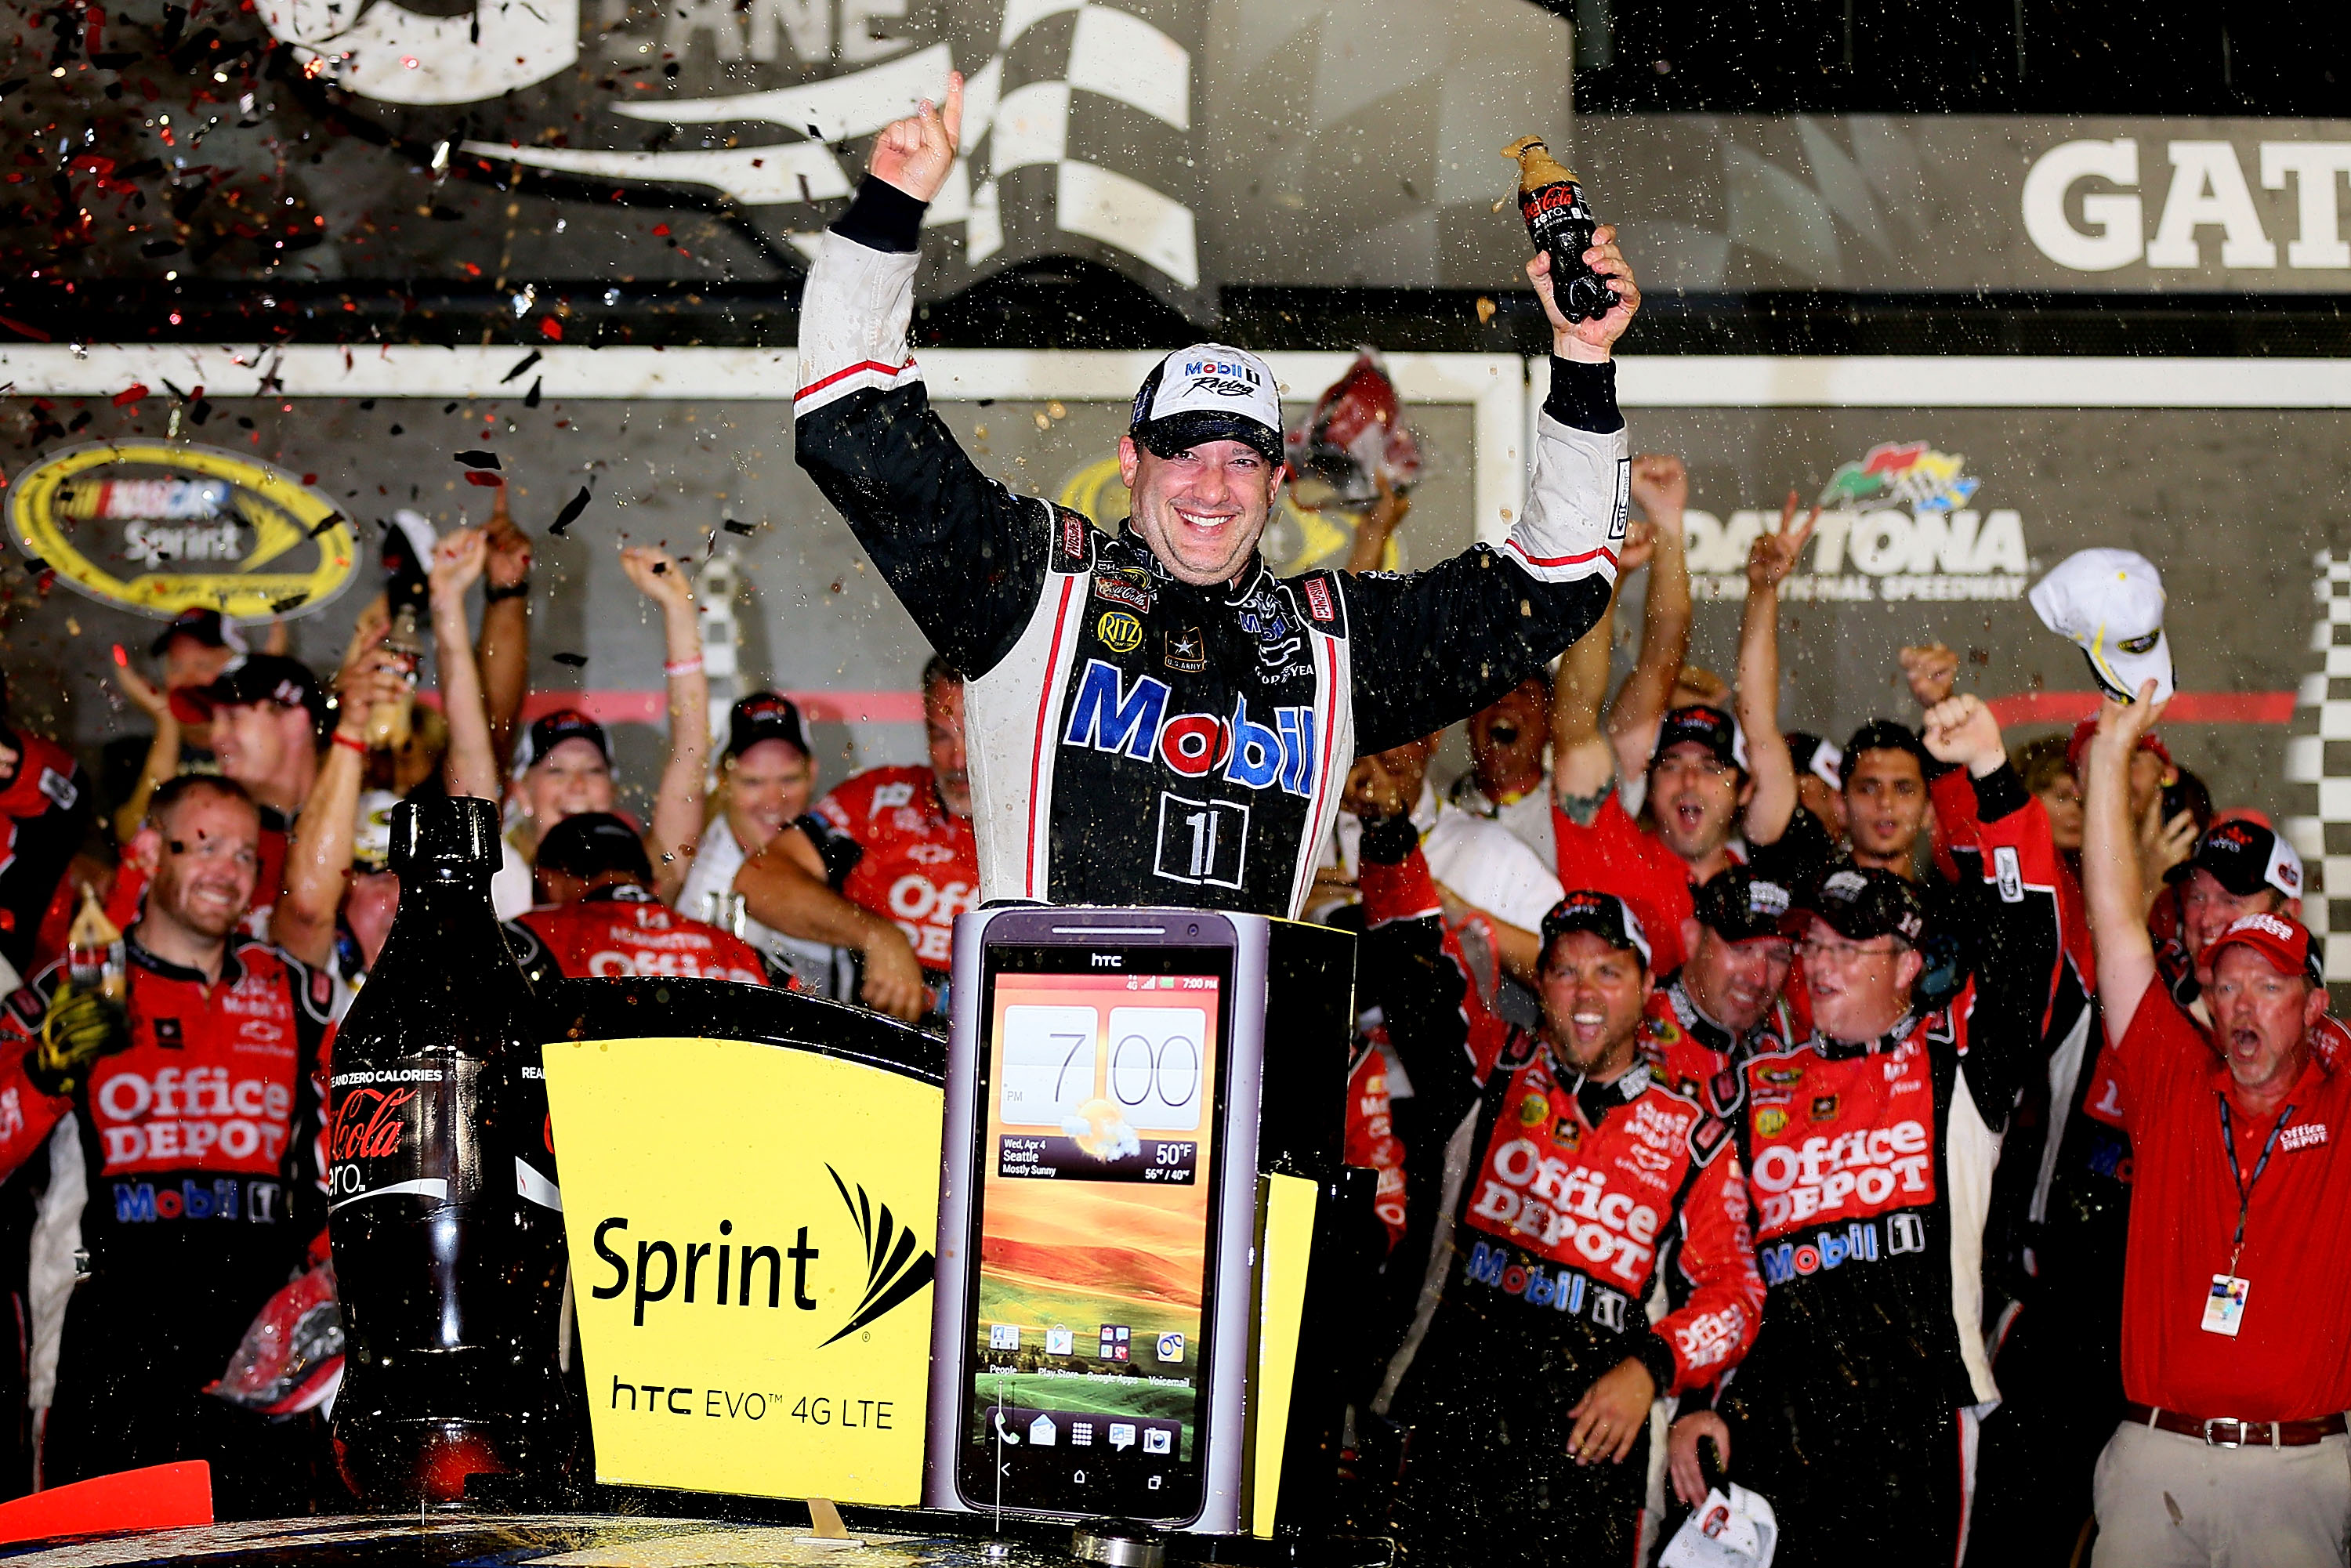 A wild ending to Saturday night's event saw Tony Stewart get his third win of the season.  However, the biggest story of the night came long before the green flag.